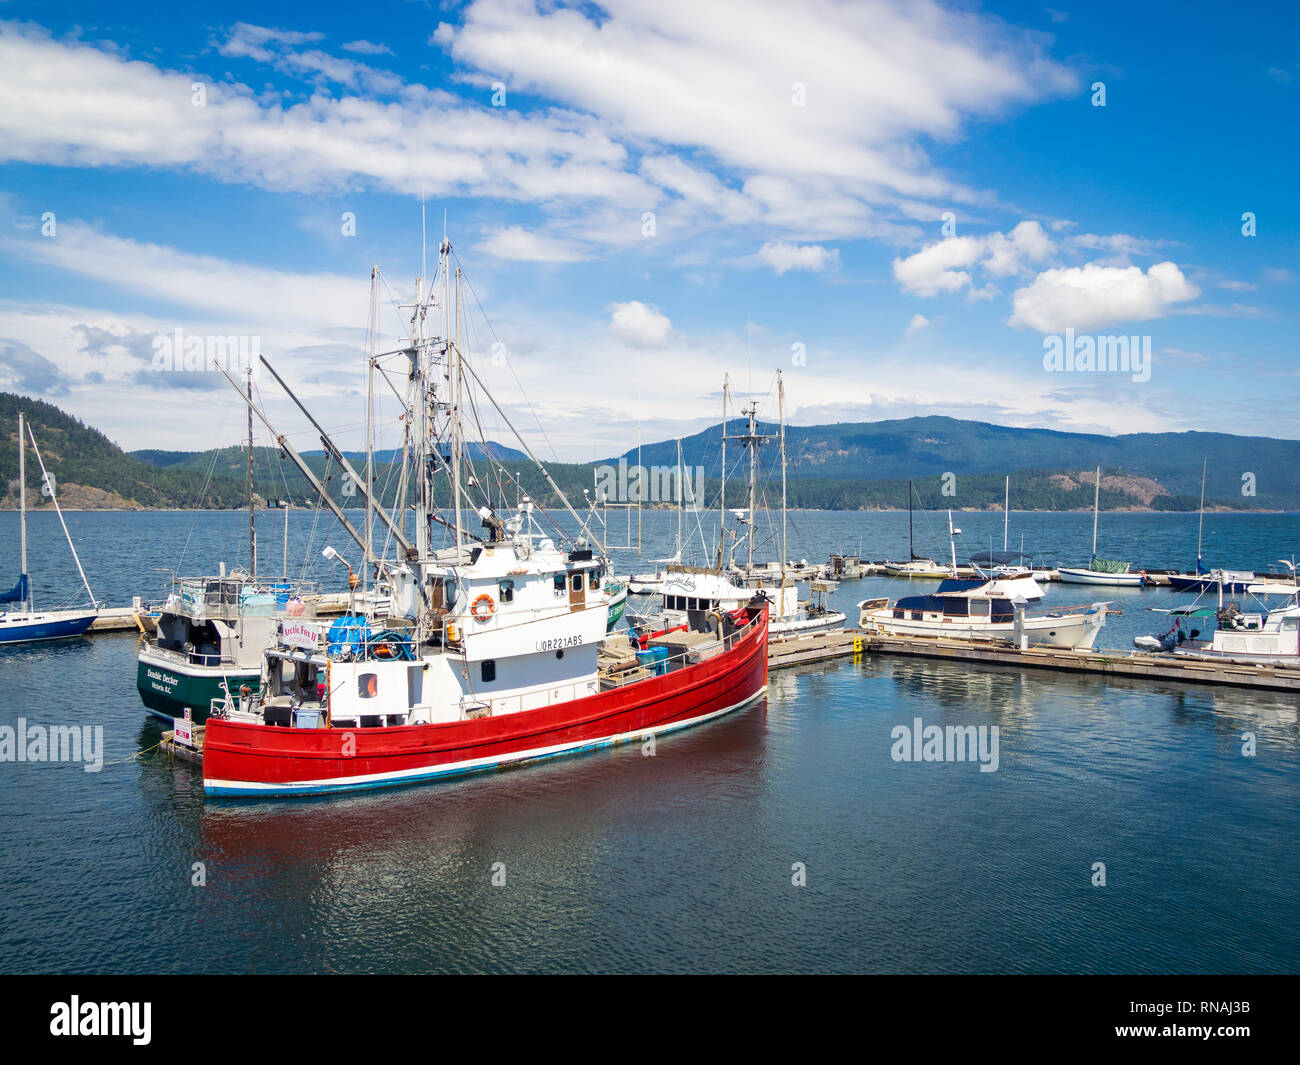 Tuna fishing boats, salmon fishing boats, and other vessels moored at Fishermen's Wharf in Cowichan Bay (Cow Bay), British Columbia, Canada Stock Photo